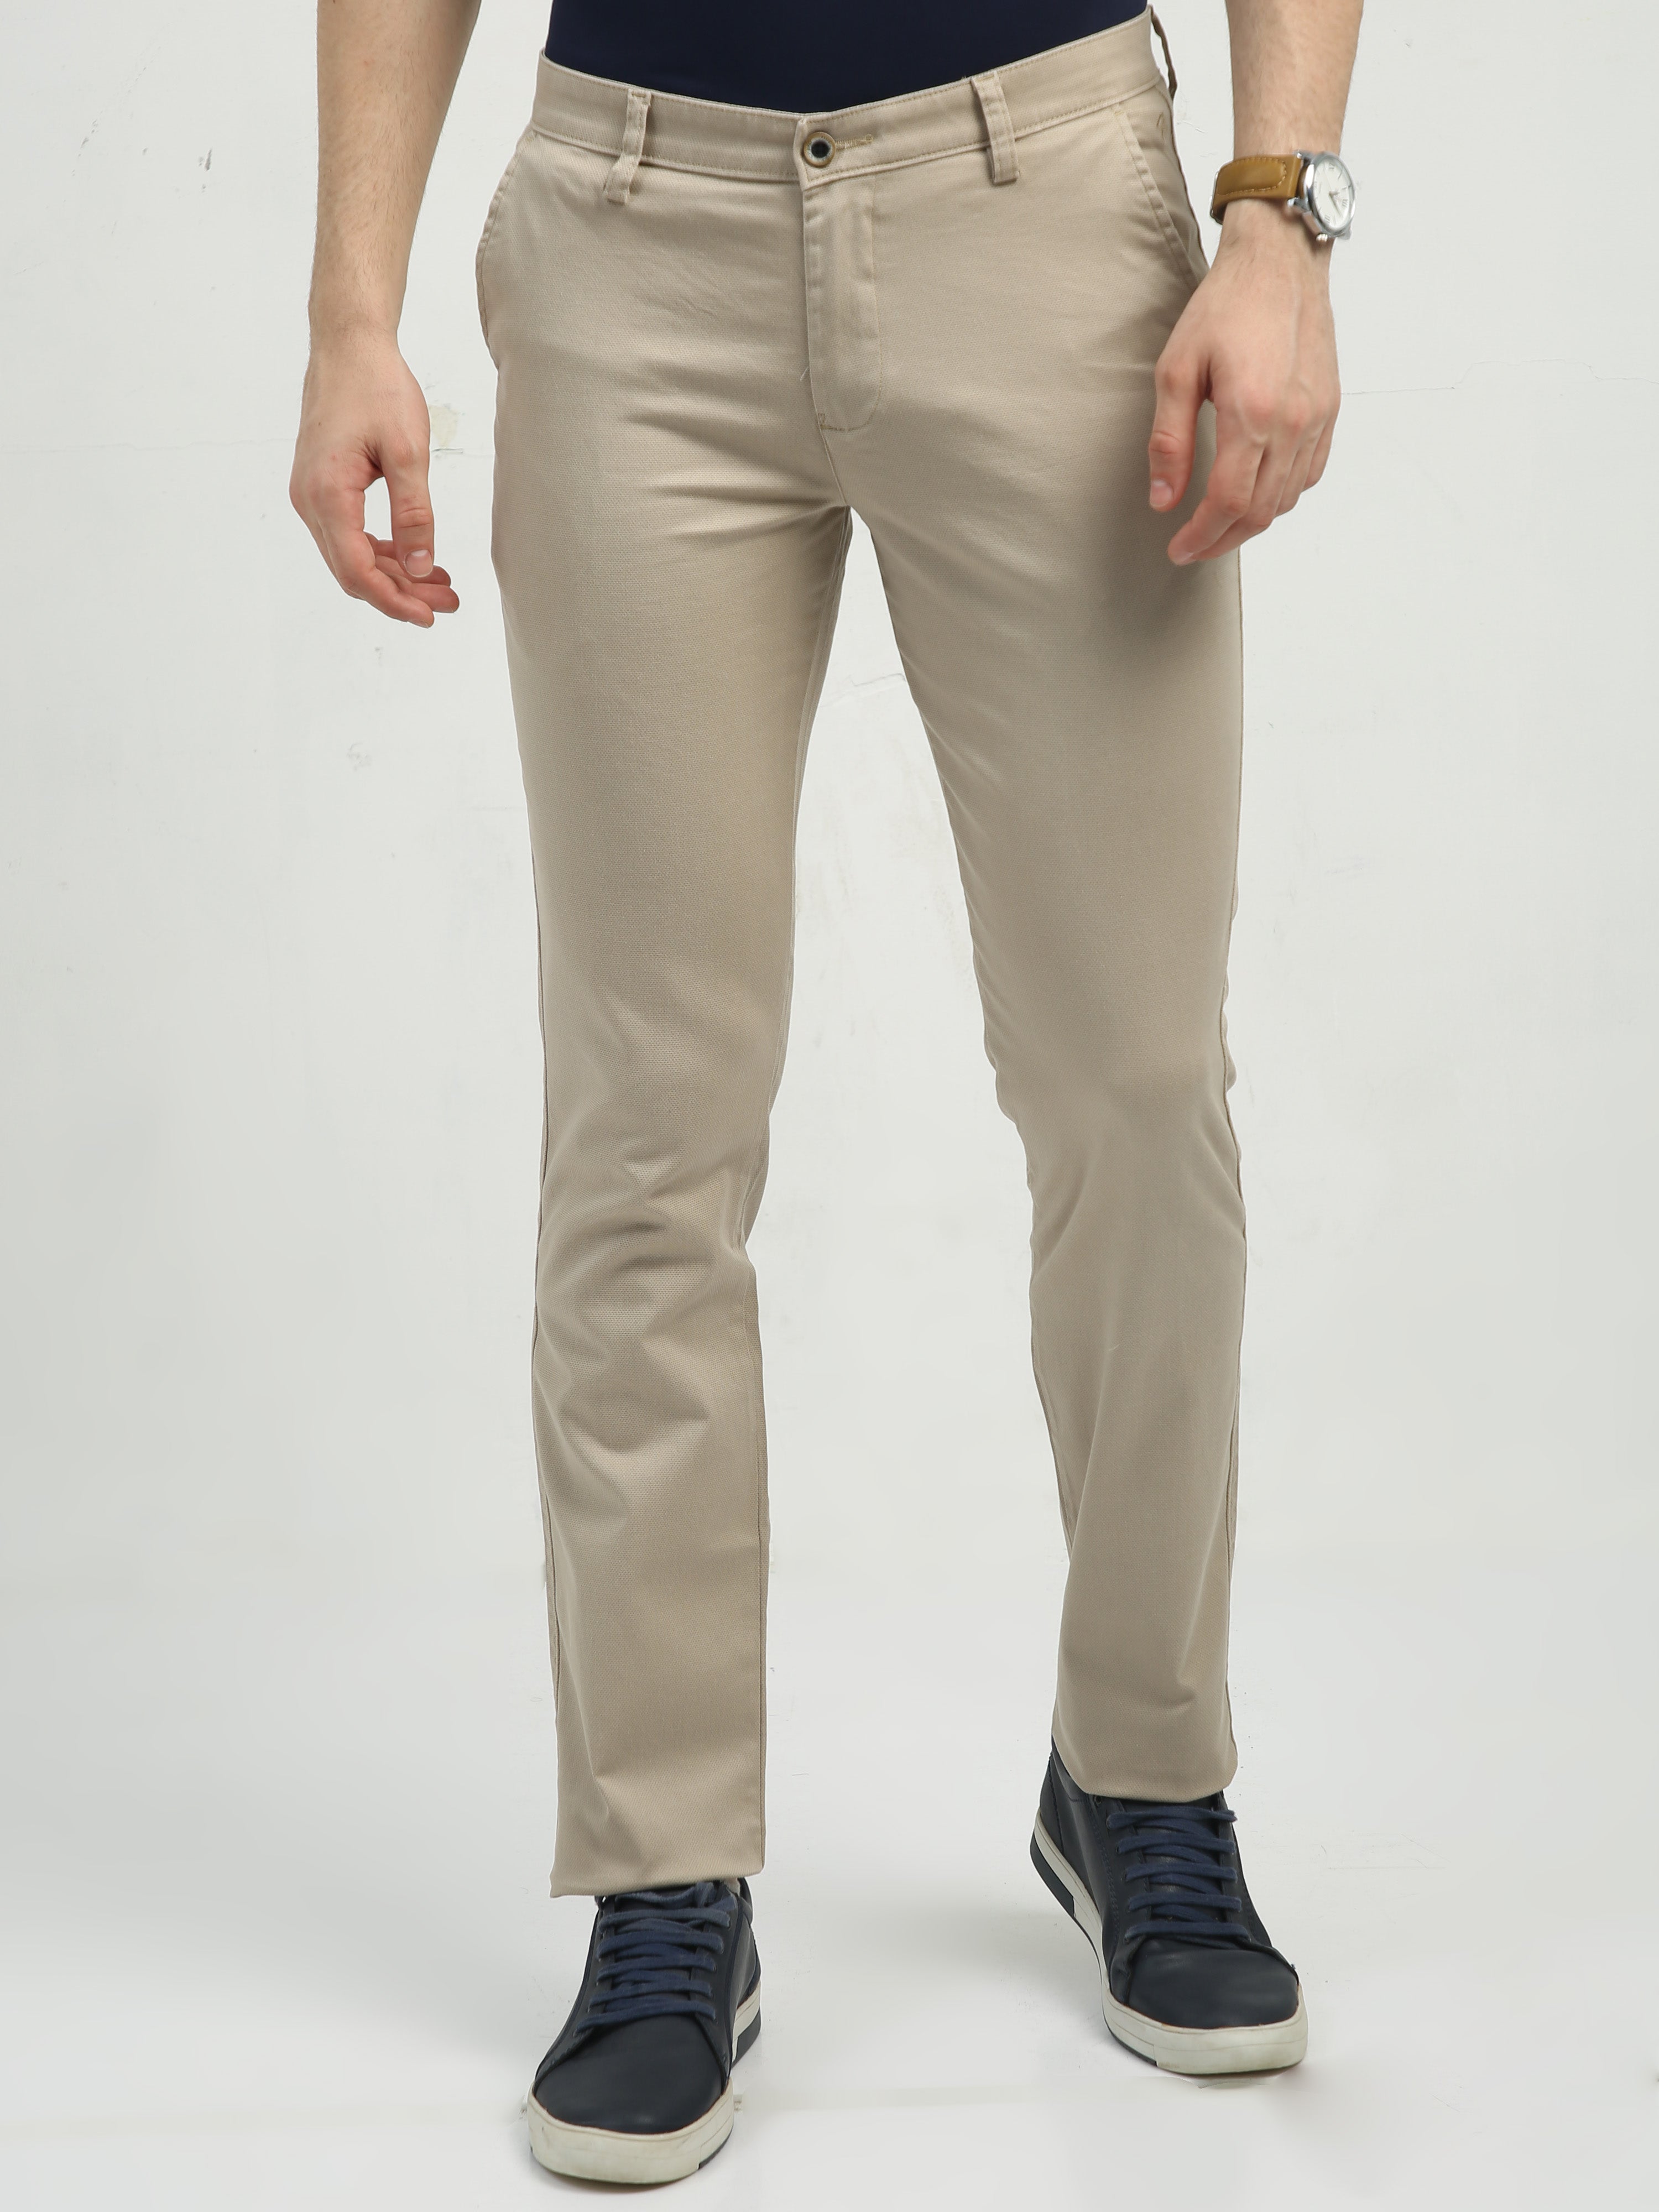 Men Cotton Formal Pant at Rs.380/Piece in chennai offer by Liso Apparels